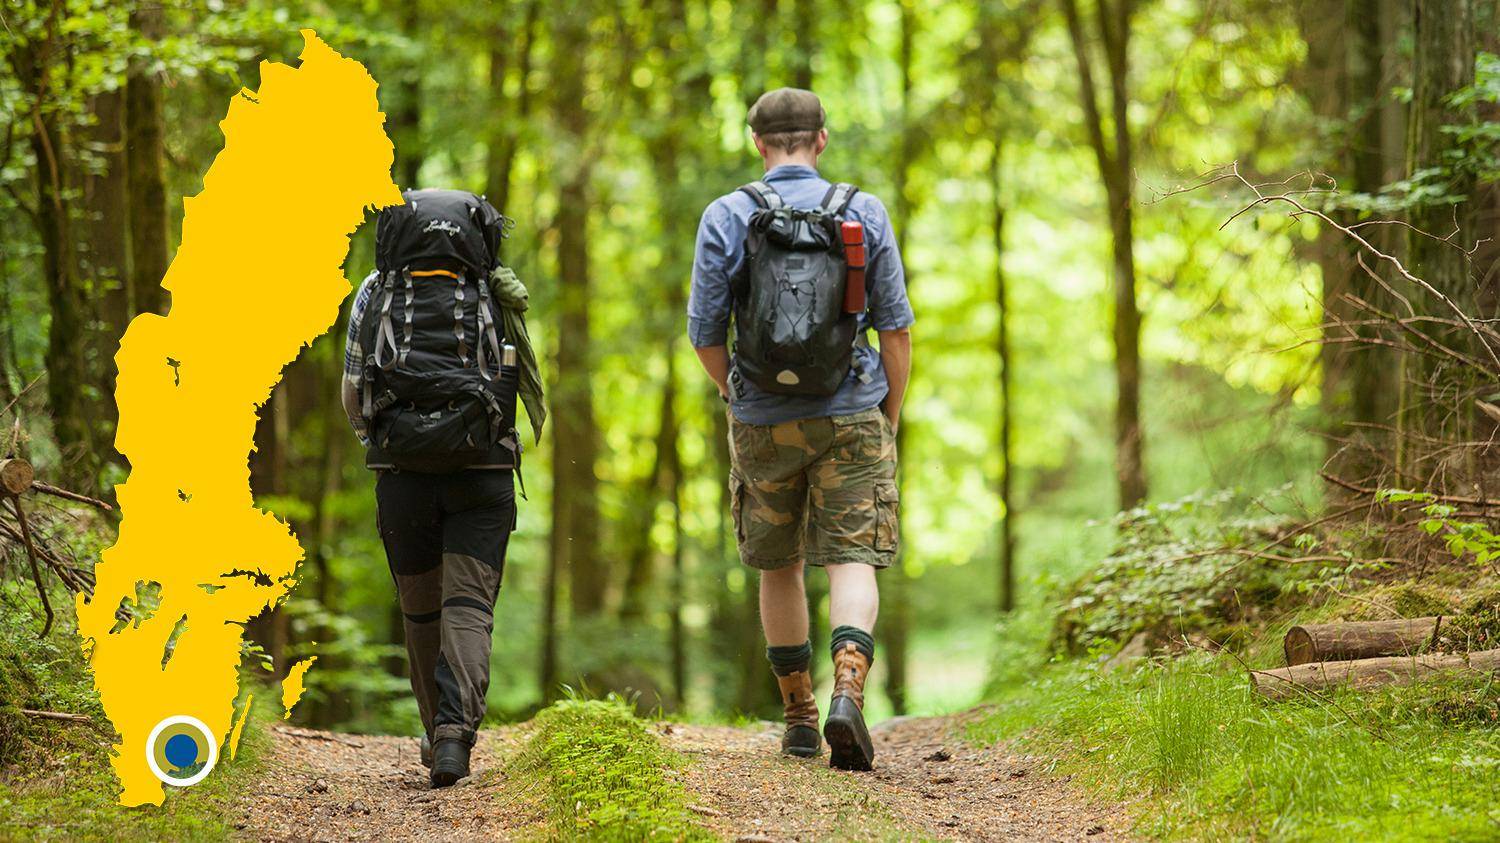 Two people with backpacks hiking in a forest. The picture shows a yellow map of Sweden with a marker that shows the location of Hemsjö.